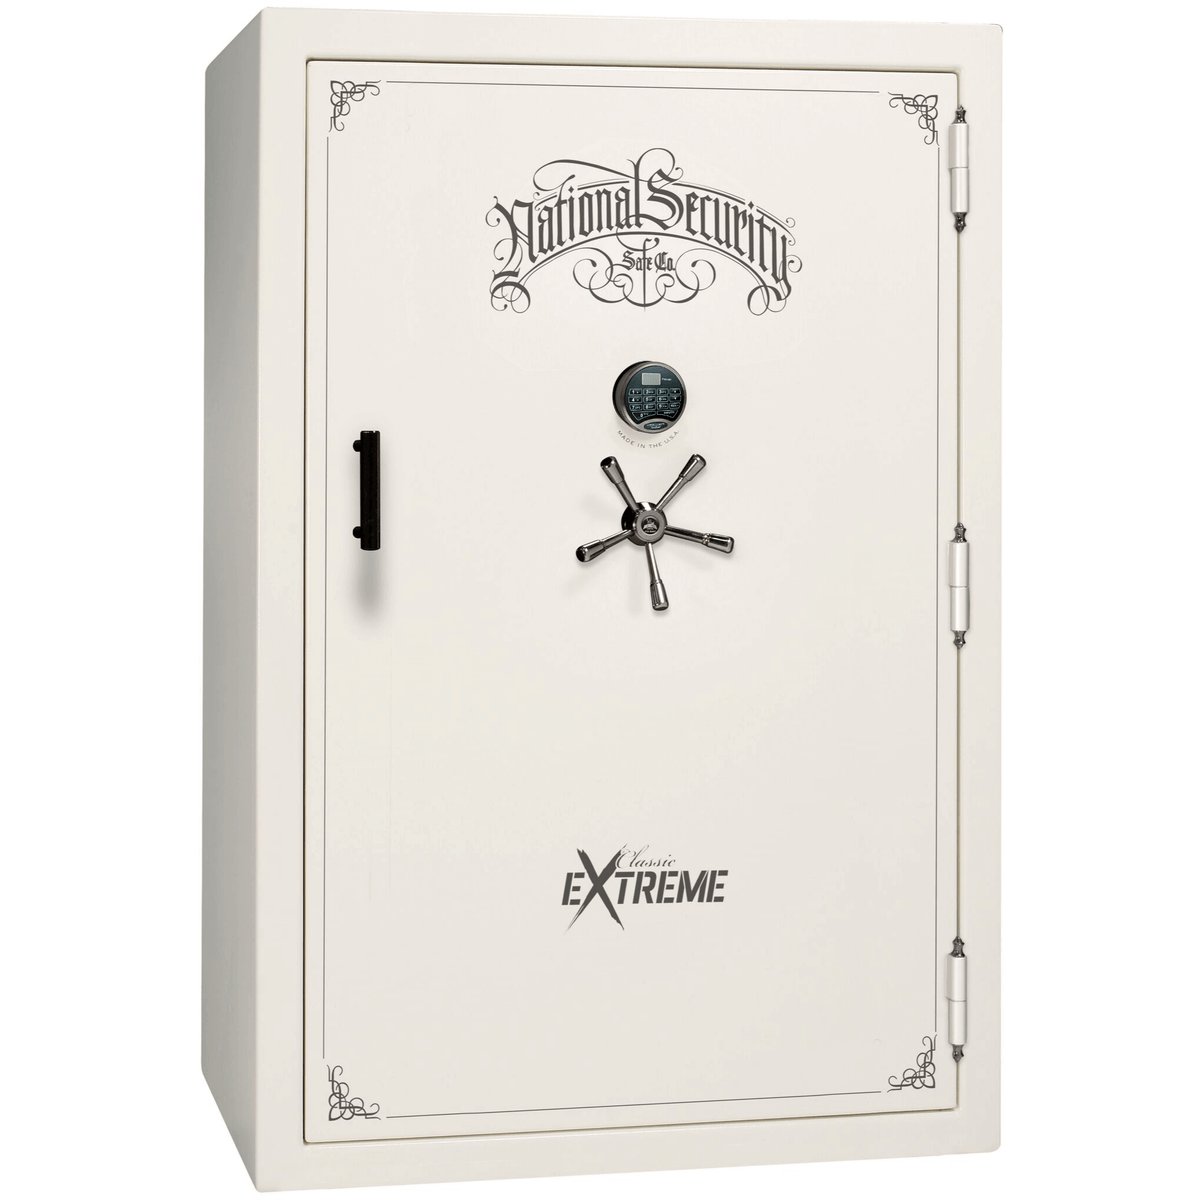 Classic extreme series | level 6 security | 90 minute fire protection - White Gloss - Mechanical - open case - MODLOCK